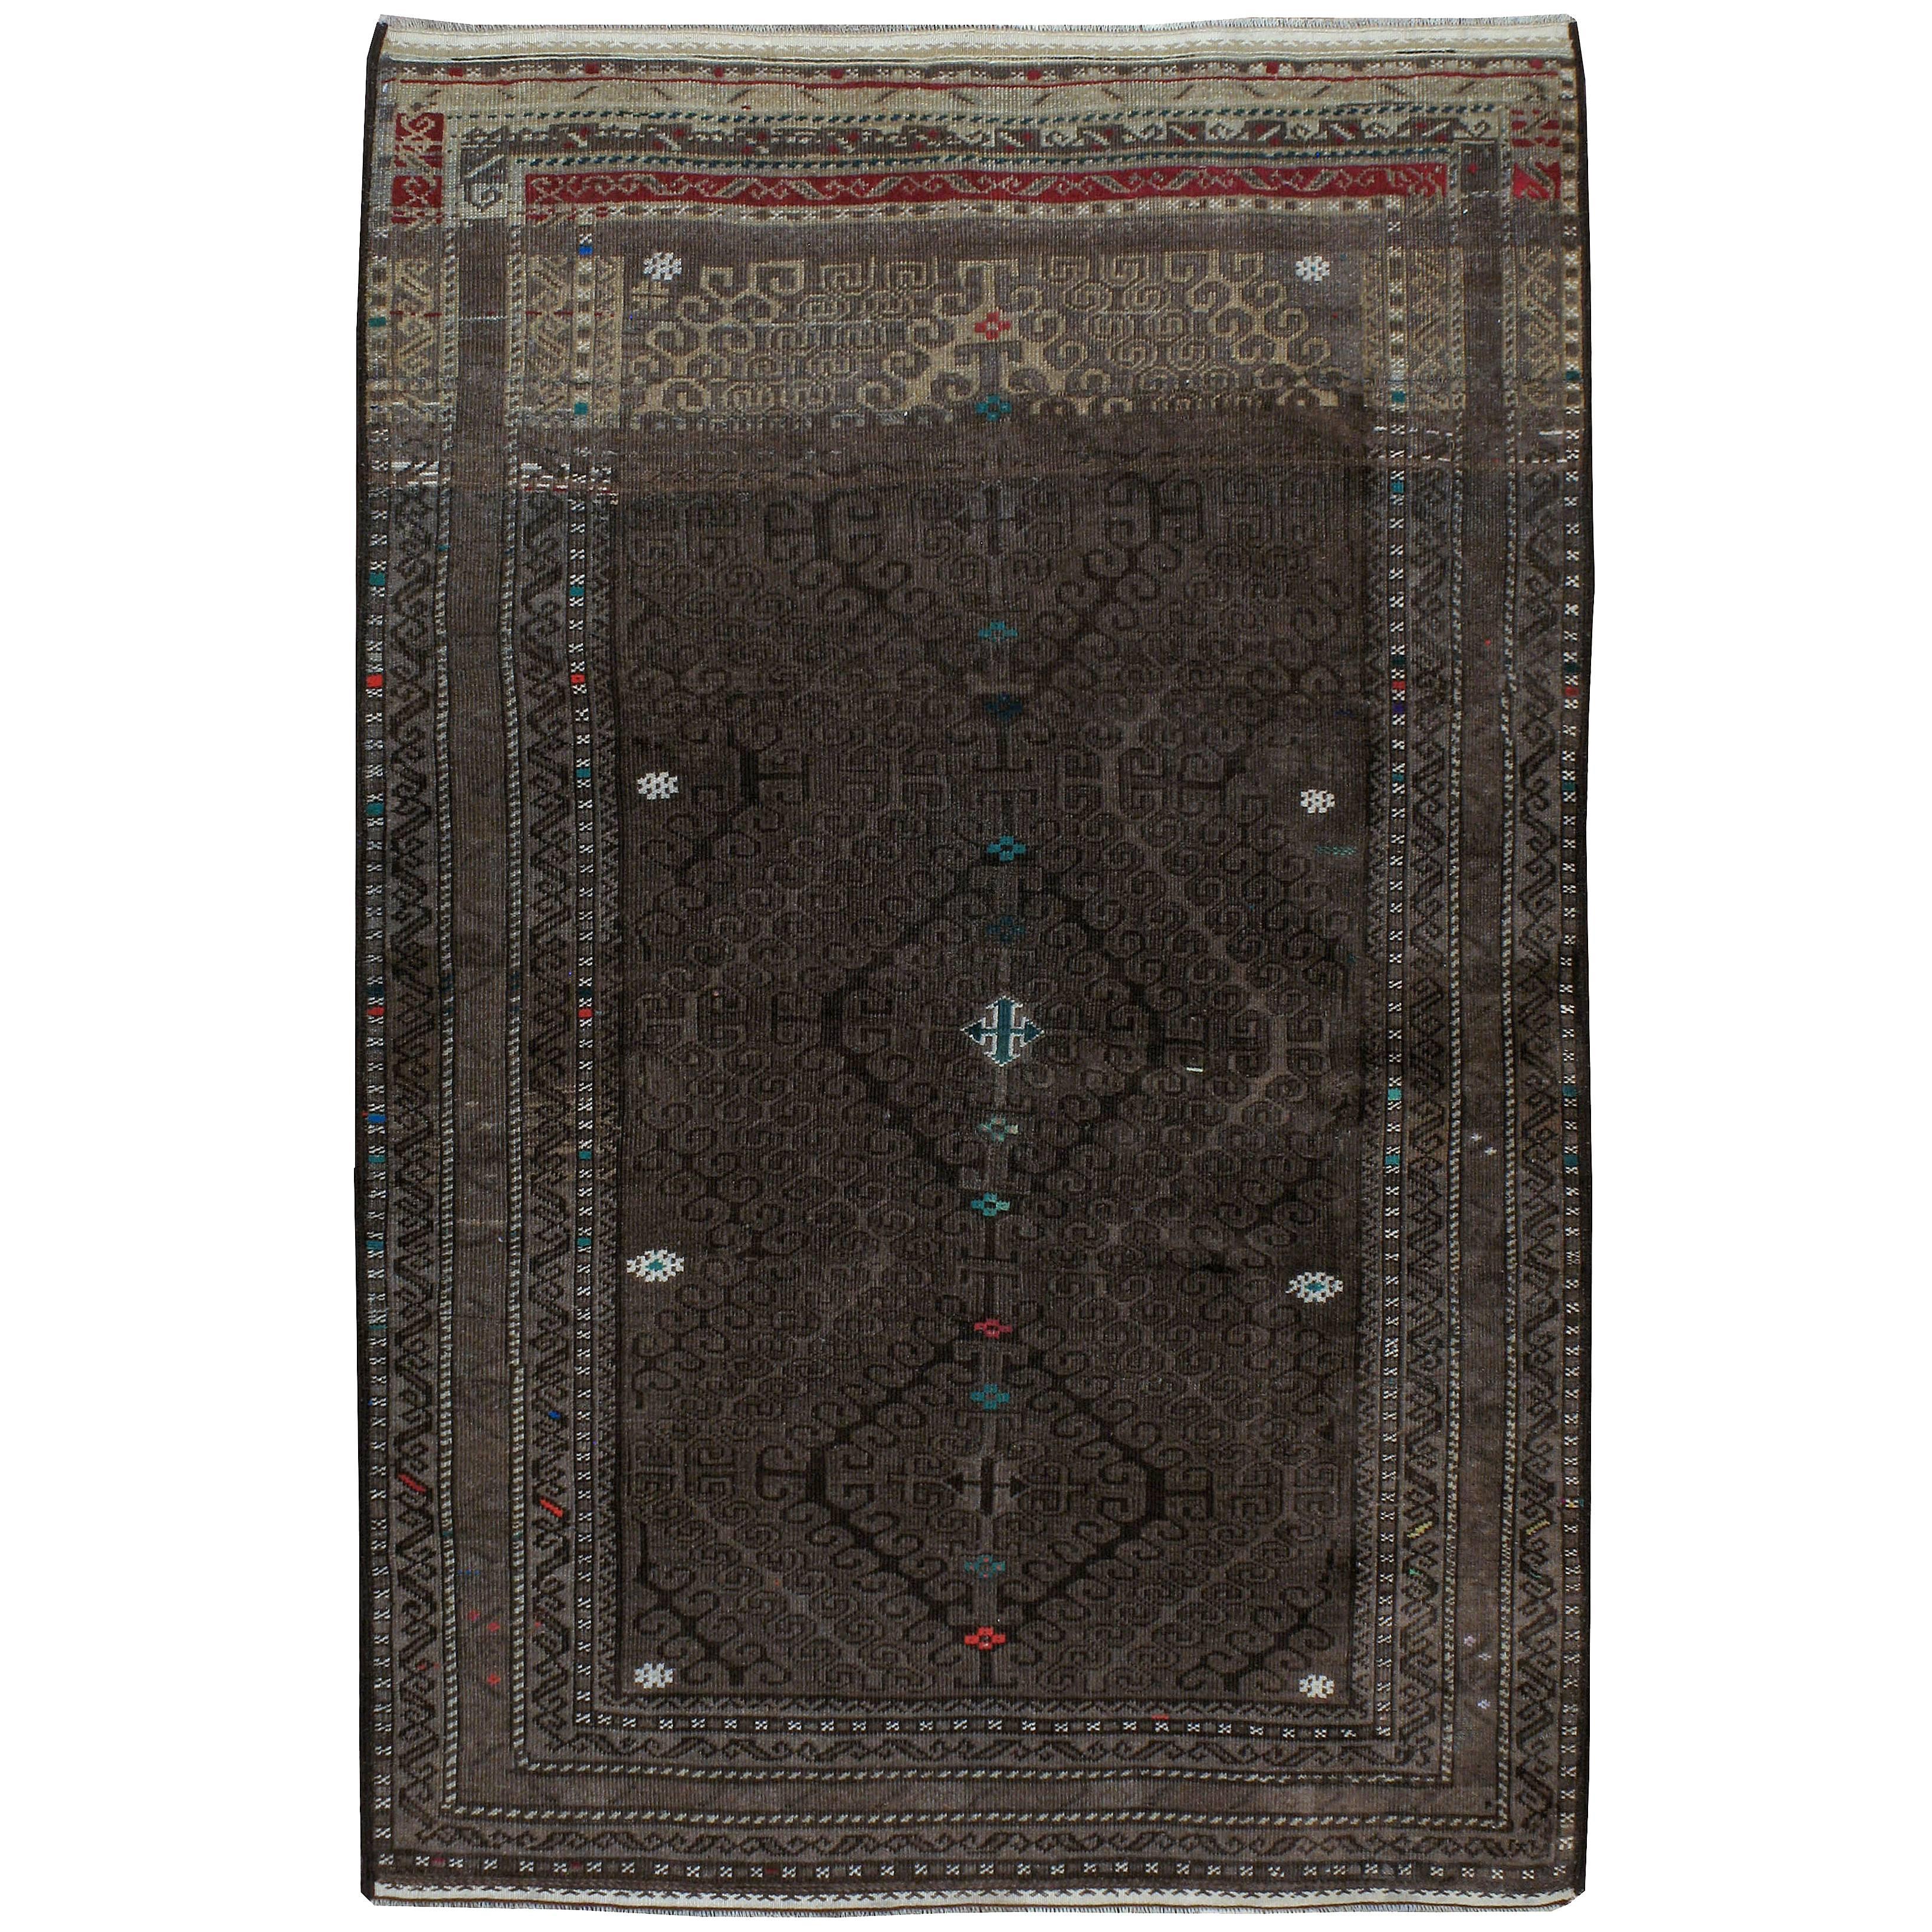 Vintage Persian Baluch Rug